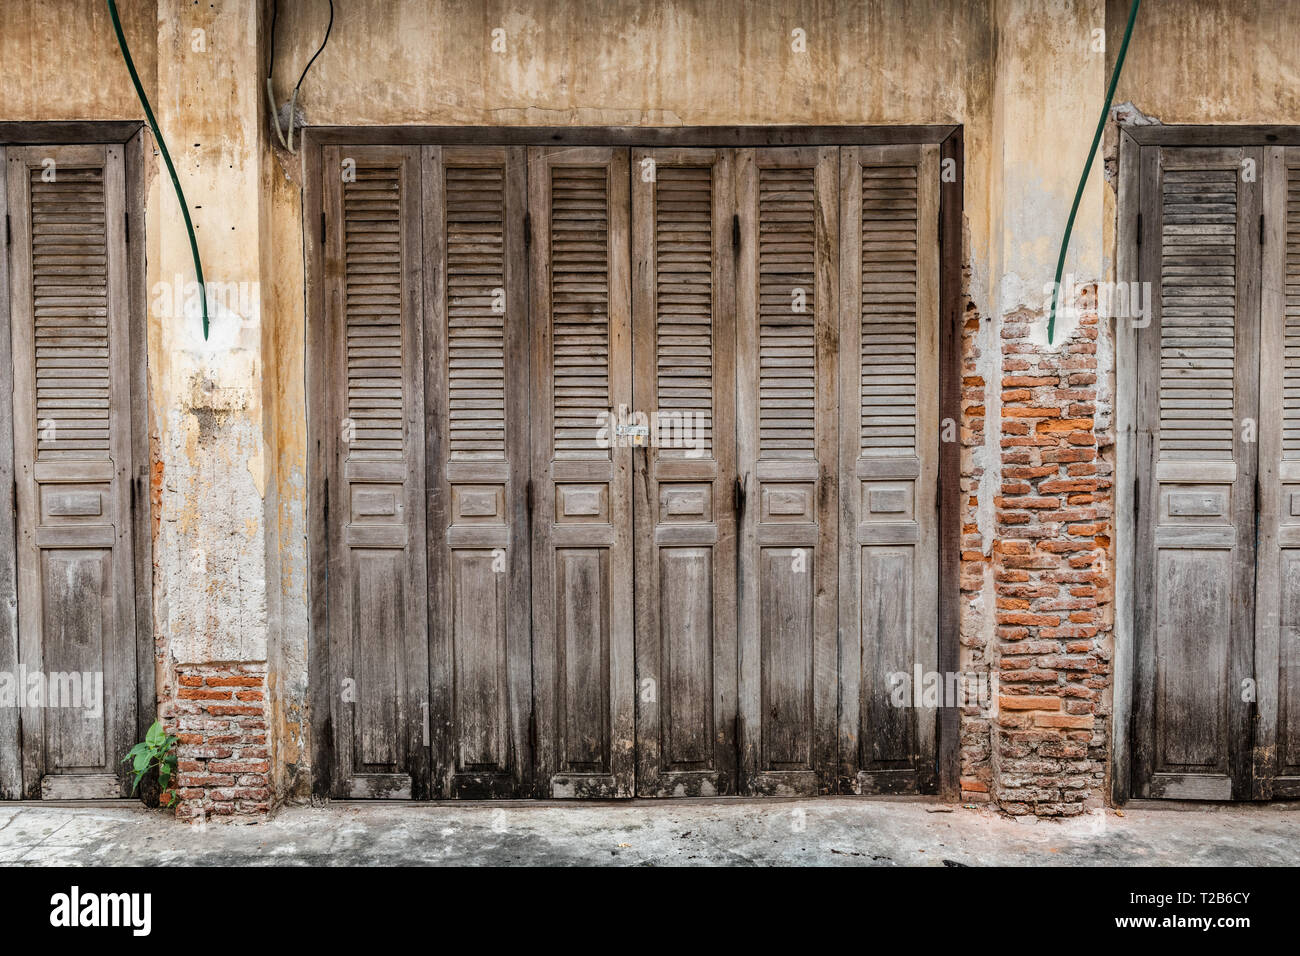 Wooden doors of ancient house in old town village for tourism in Thailand. Stock Photo